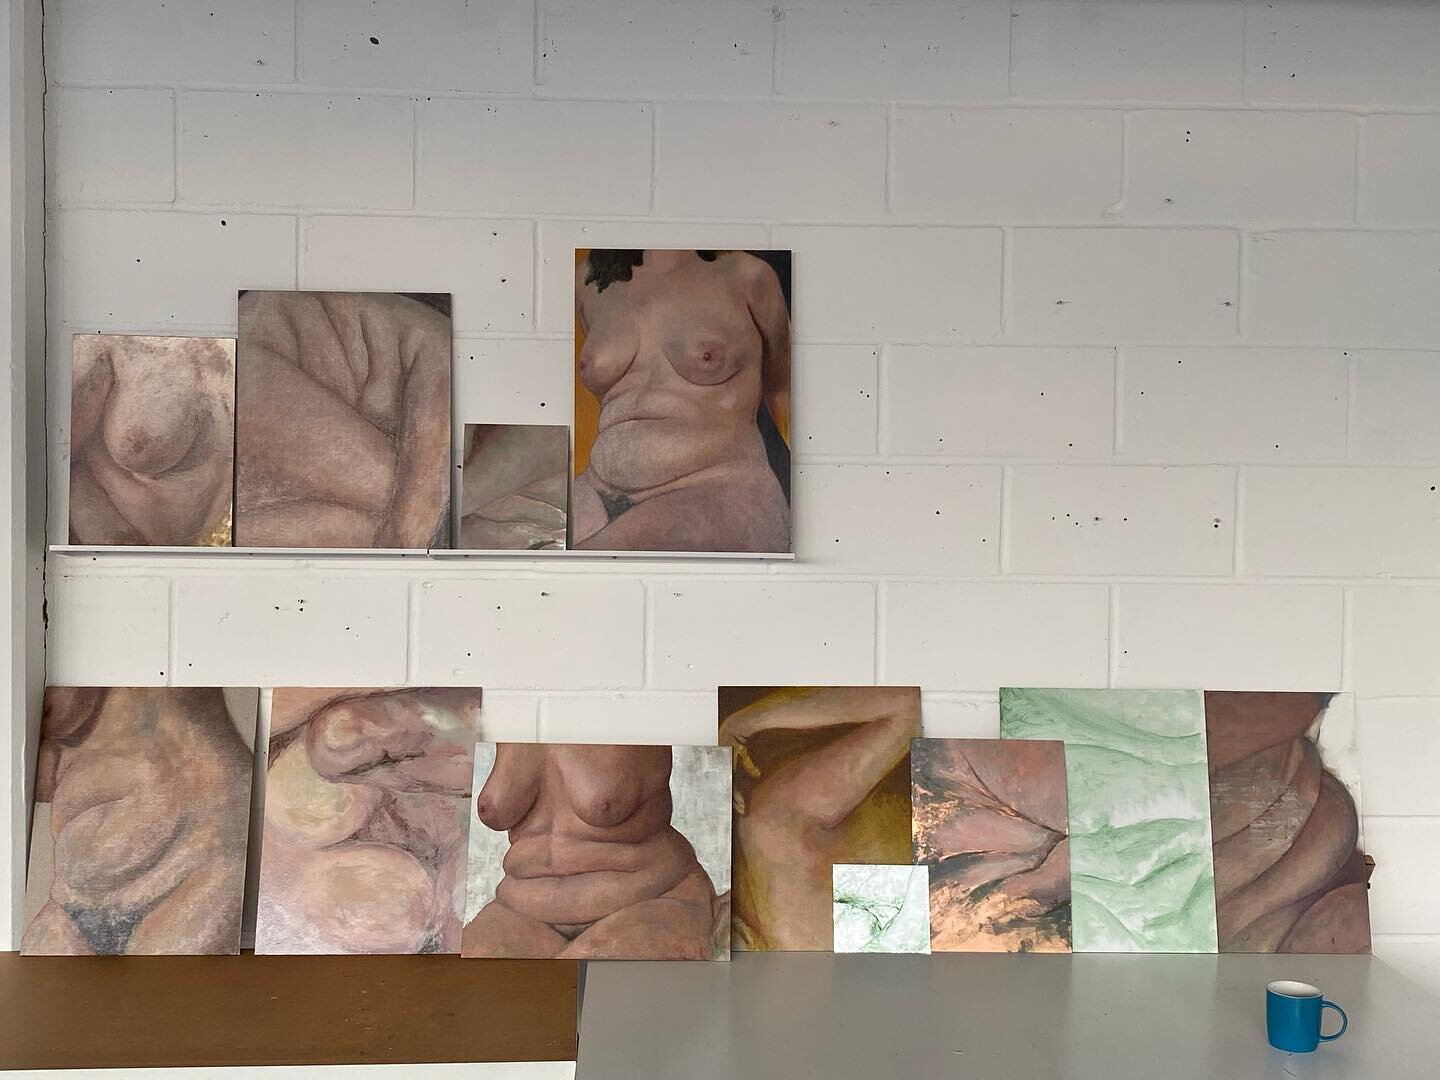 Final day @workhall.uk Sedici artist residency and it is interesting to look at the numerous flesh studies I have started (not finished!) over the last two weeks.  I set out to experiment with new colors, surfaces and painting techniques. And I have 